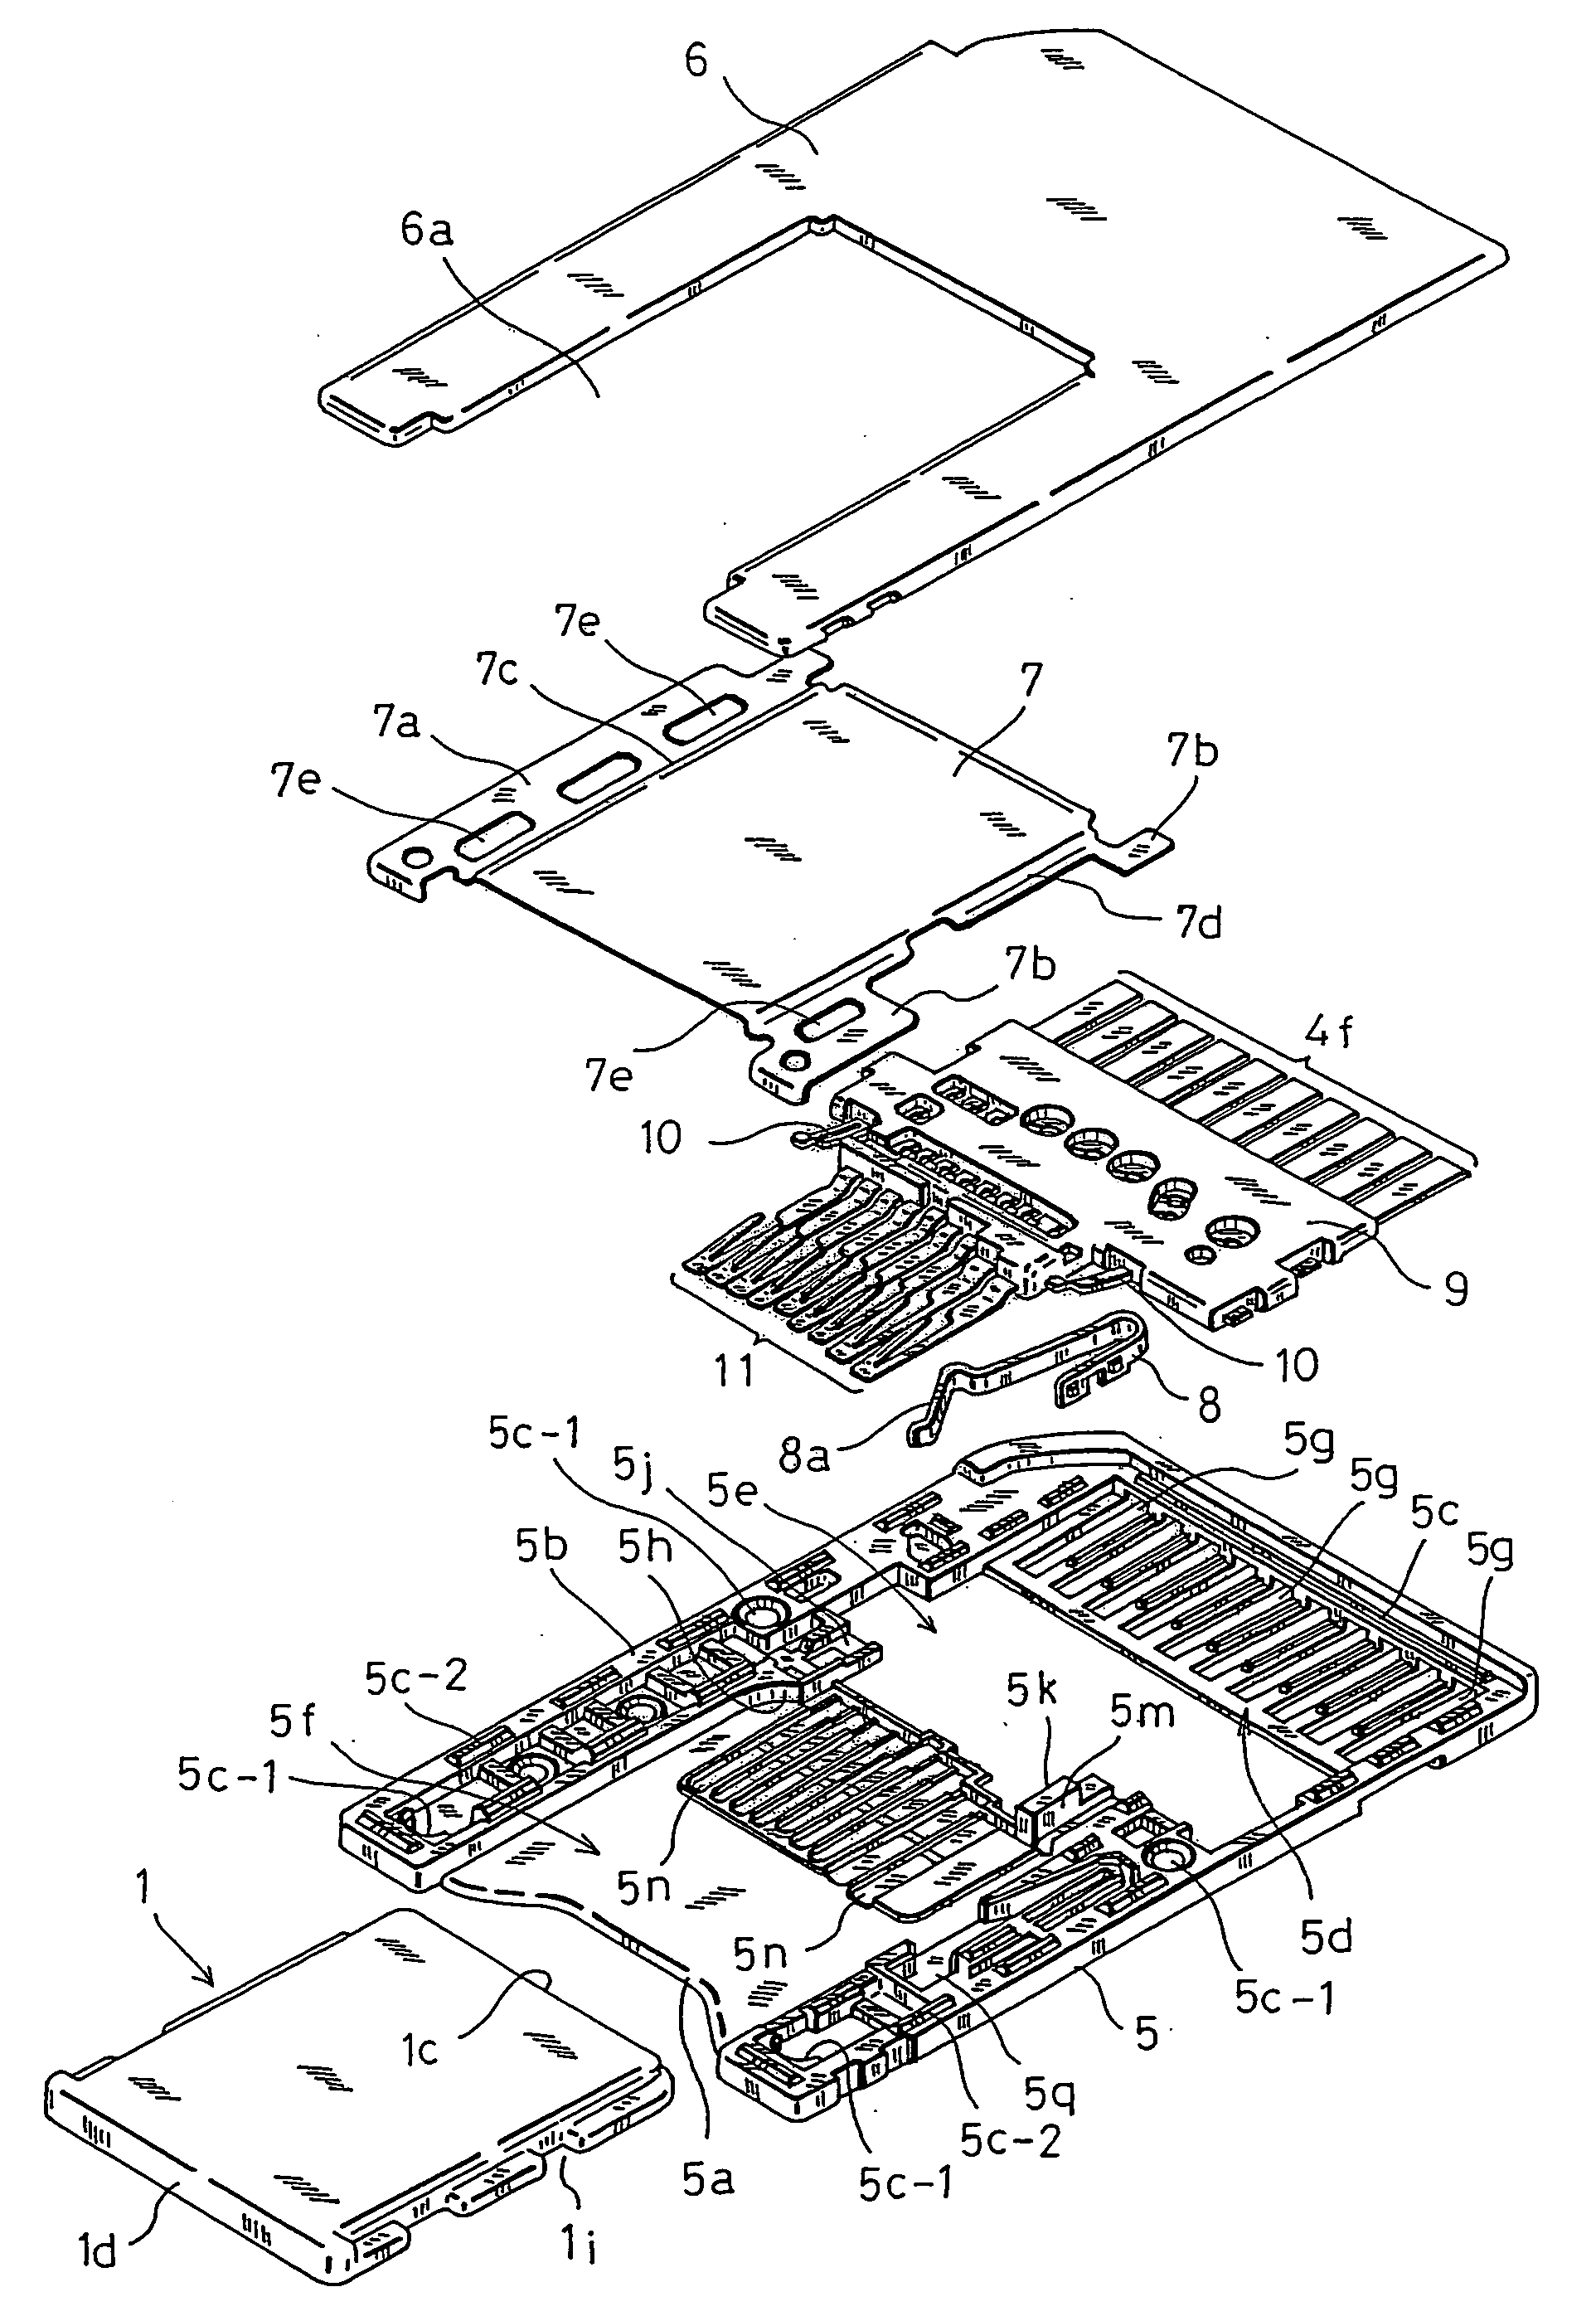 Contact, and card adaptor and card connector having the same